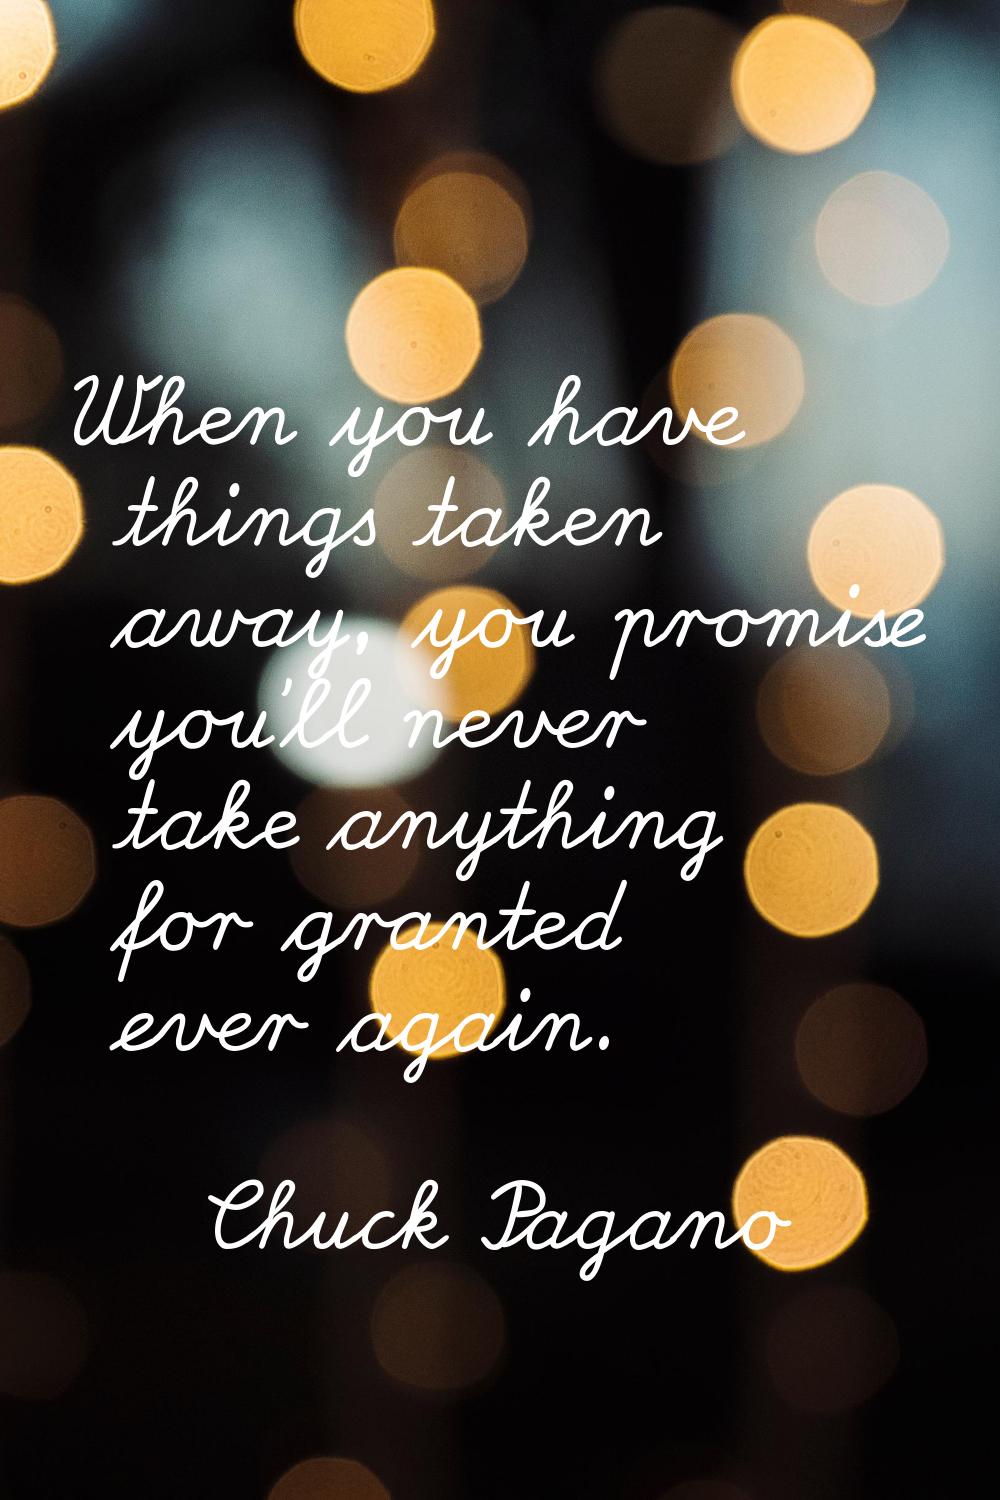 When you have things taken away, you promise you'll never take anything for granted ever again.